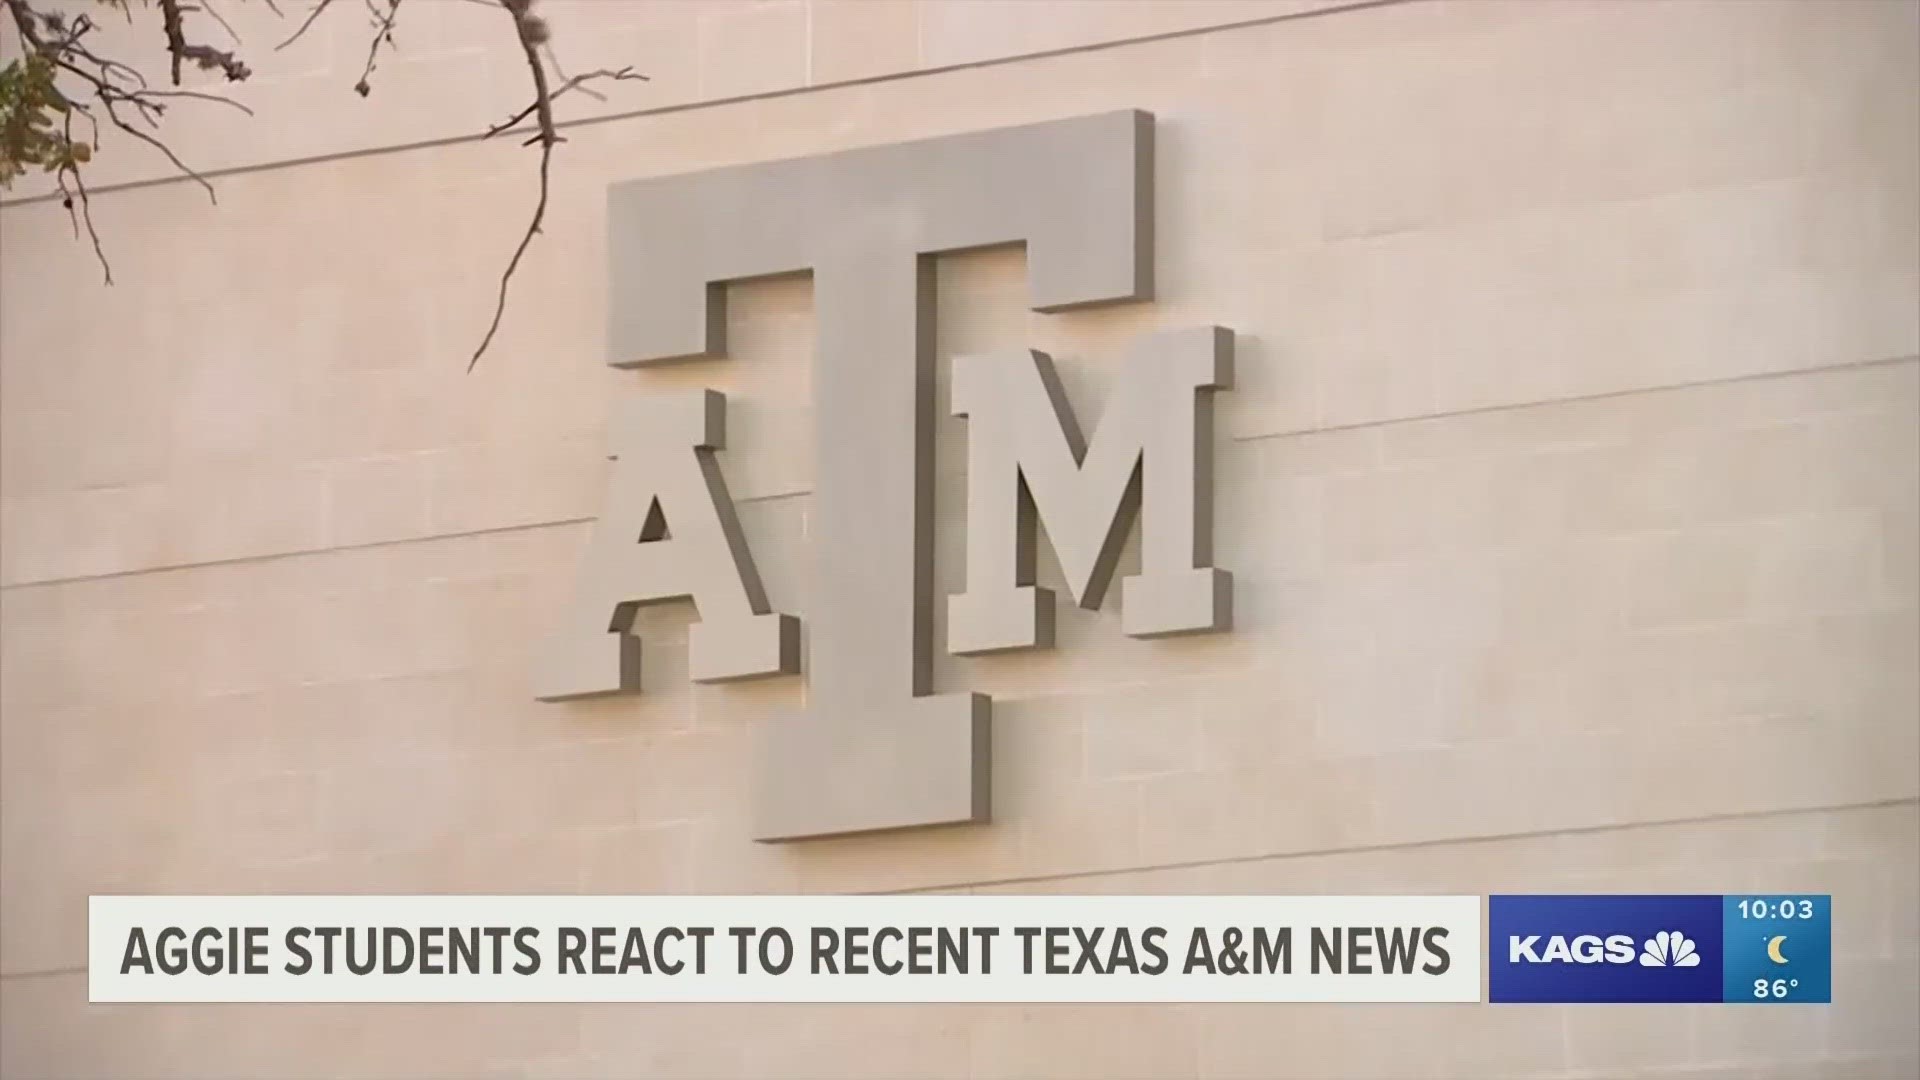 Over the past few weeks, Texas A&M has garnered national attention following details being brought to light following the failed hiring of Dr. Kathleen McElroy.